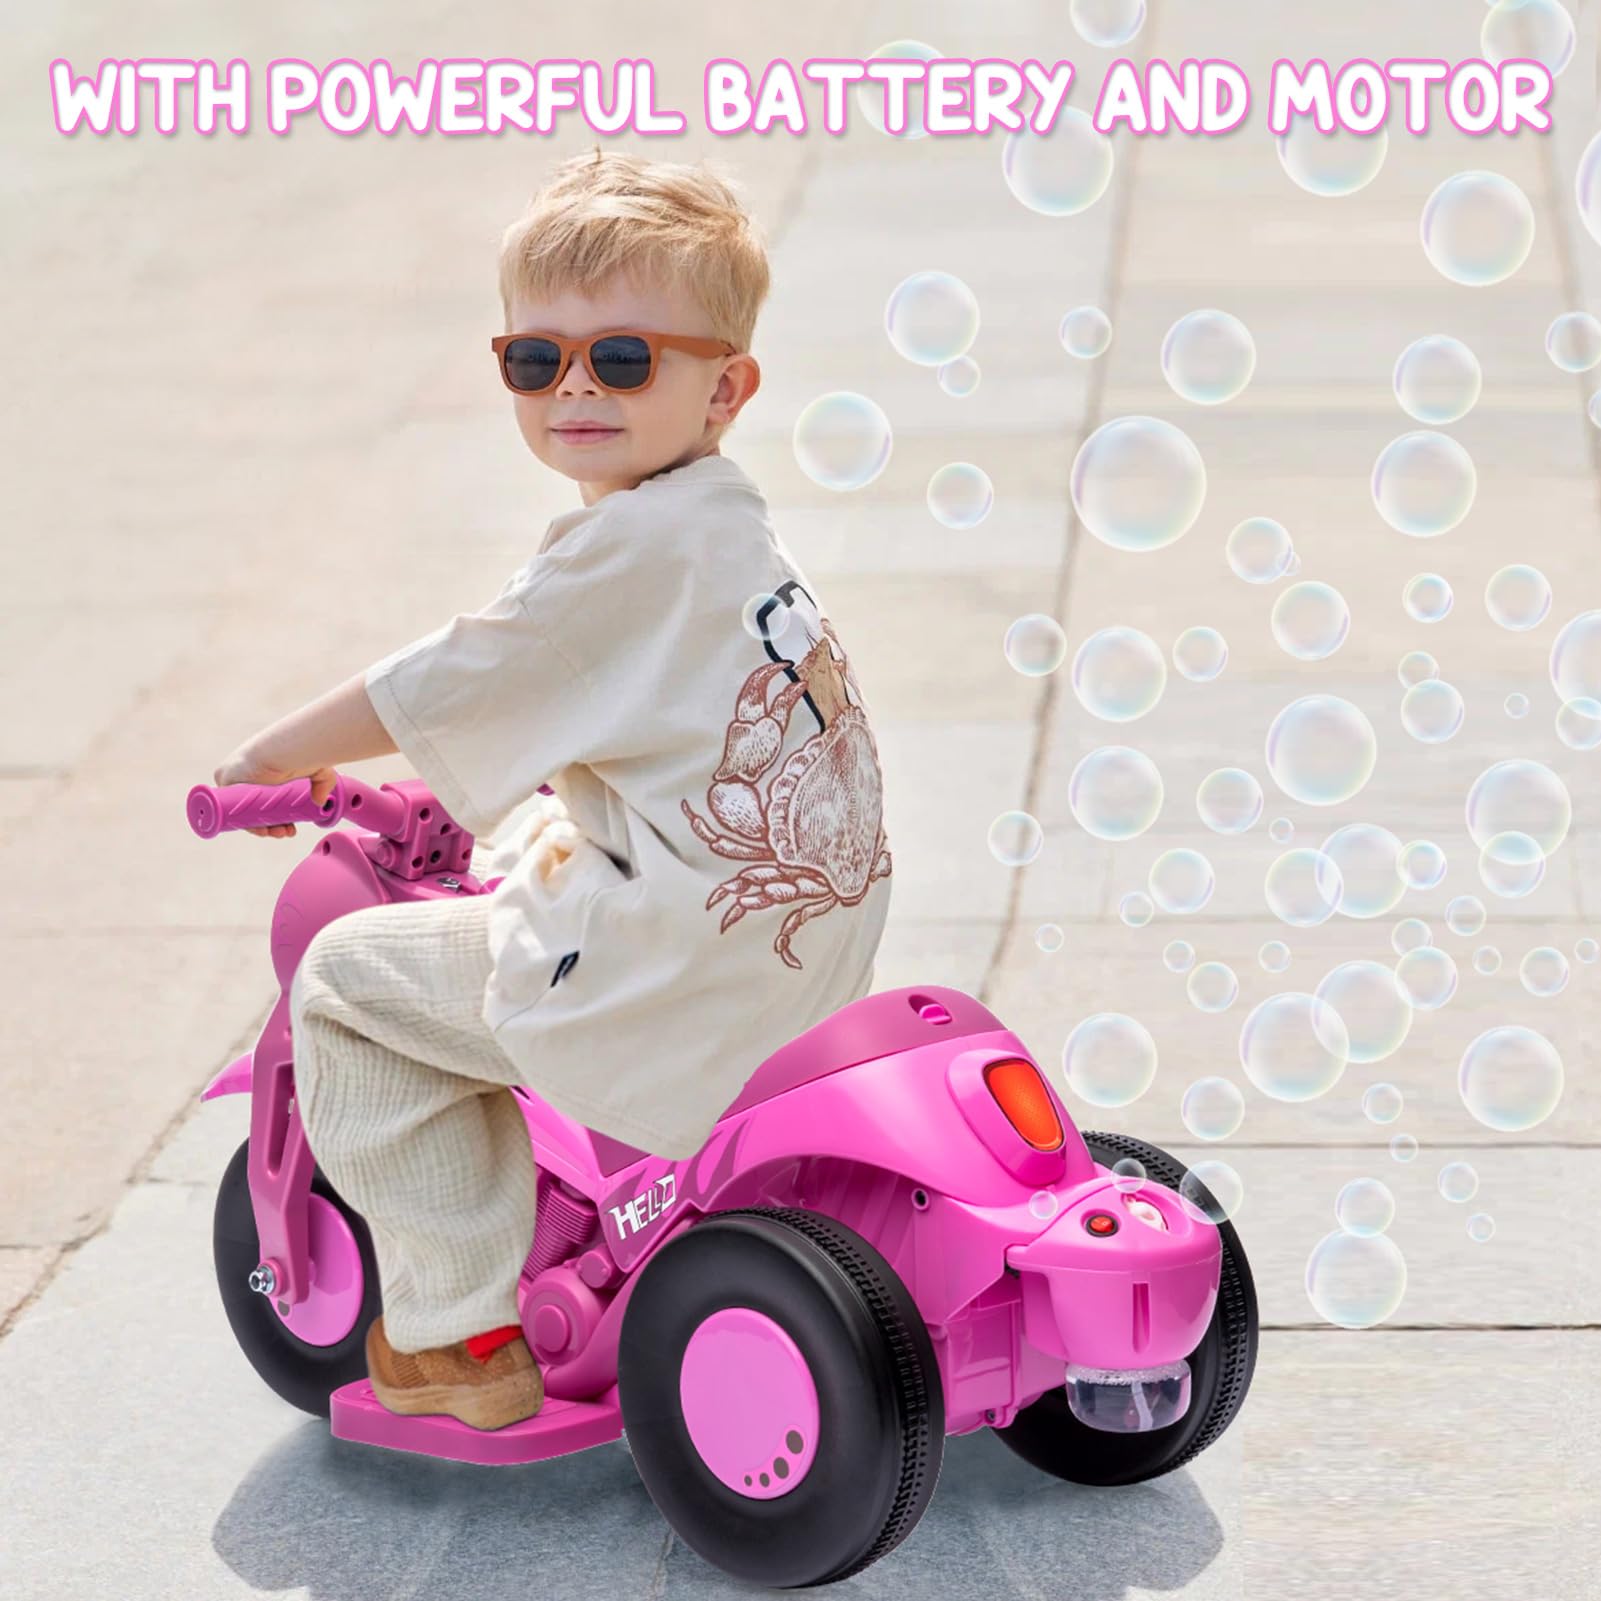 Kids Electric Motorcycle with Bubble Function, 6V Battery Powered Ride On Motorbike Toy w/LED Headlights, Forward/Reserve, Music, Pedal, 3 Wheels Bubble Car for Kids 3 and Up Boys Girls, Pink